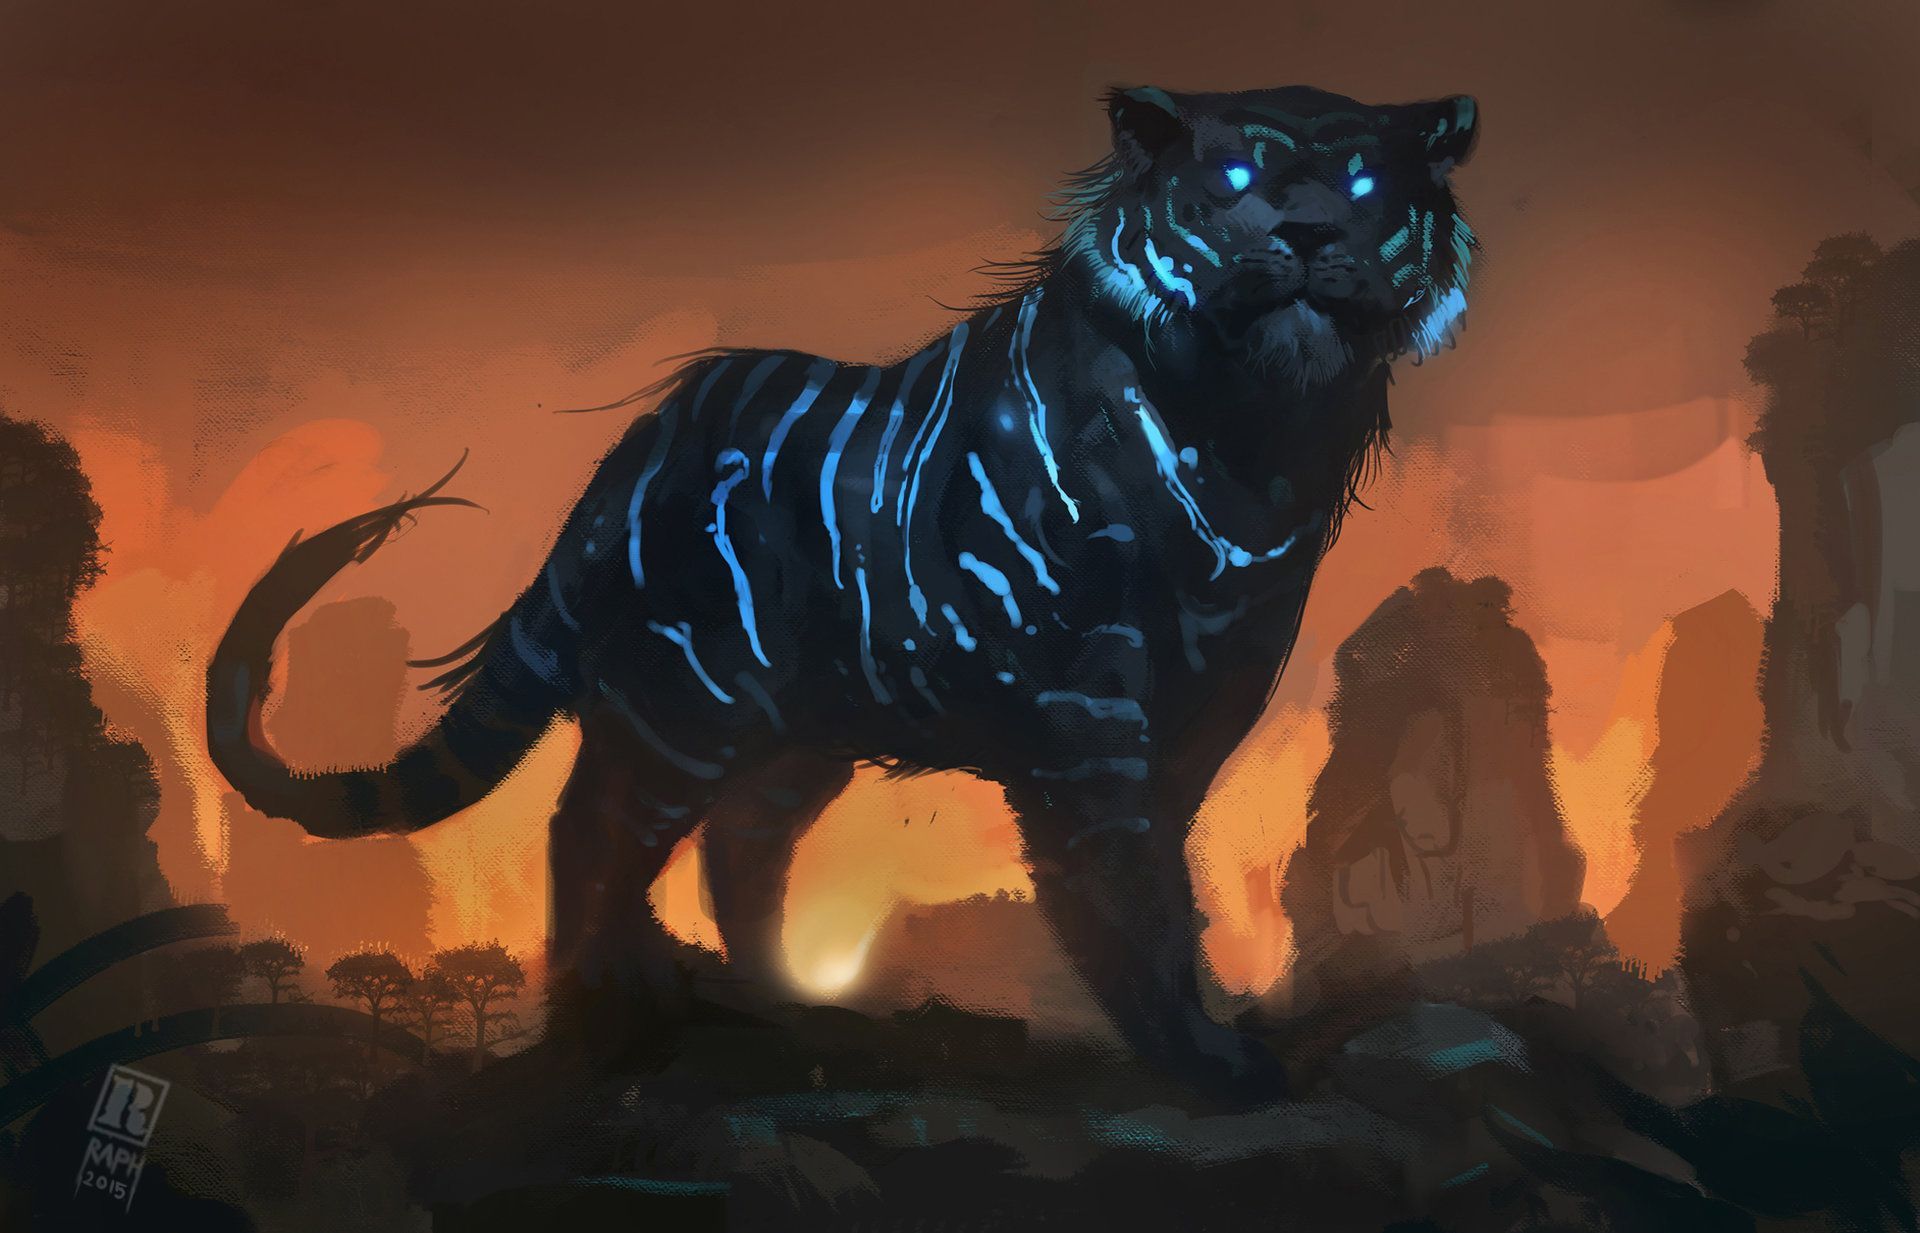 Cool, glow in the dark blue tigers. Here kitty kitty